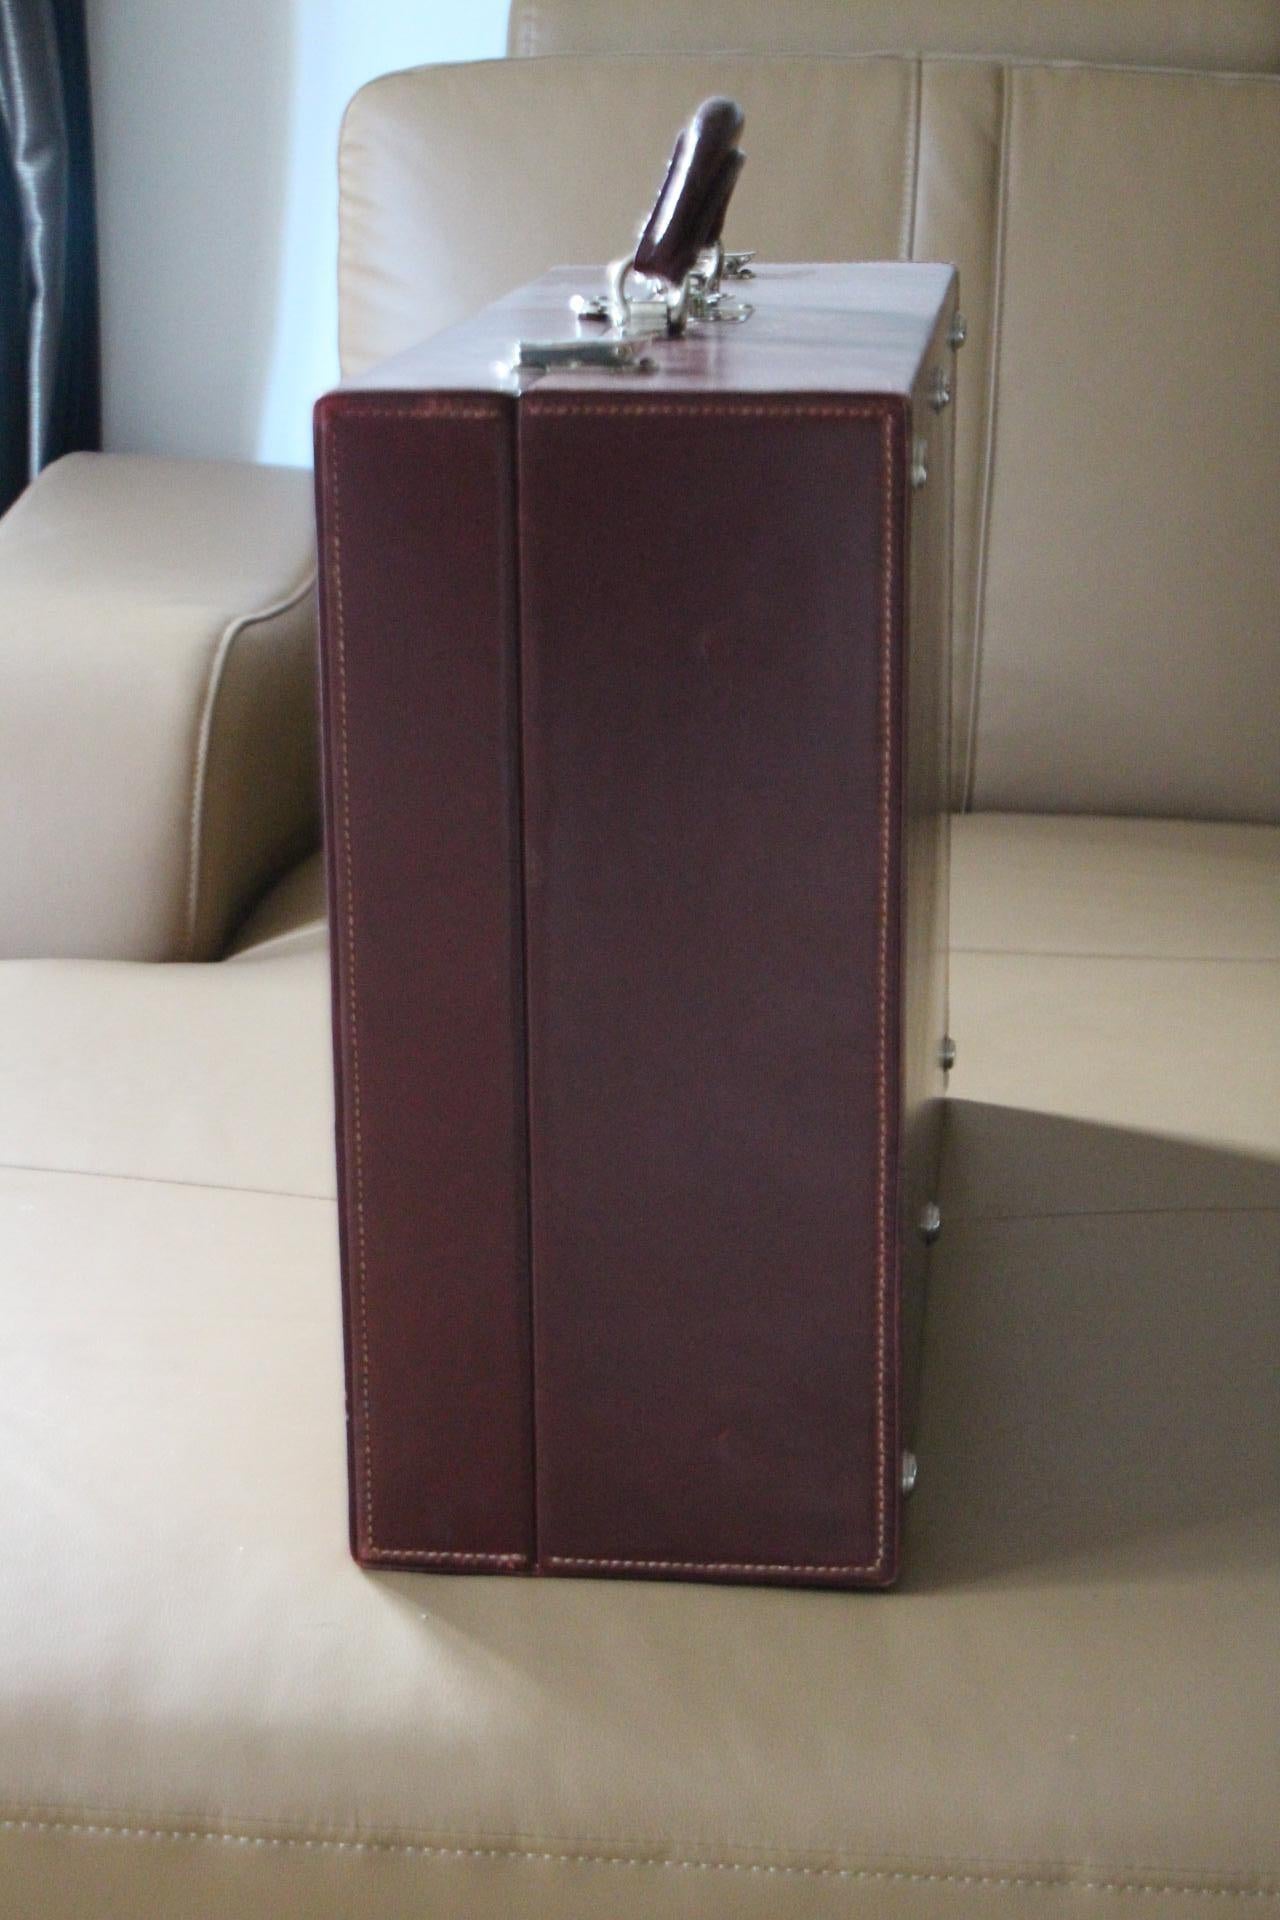 Red Leather Hermes Suitcase 53 cm, Hermes Trunk, Hermes Luggage 6